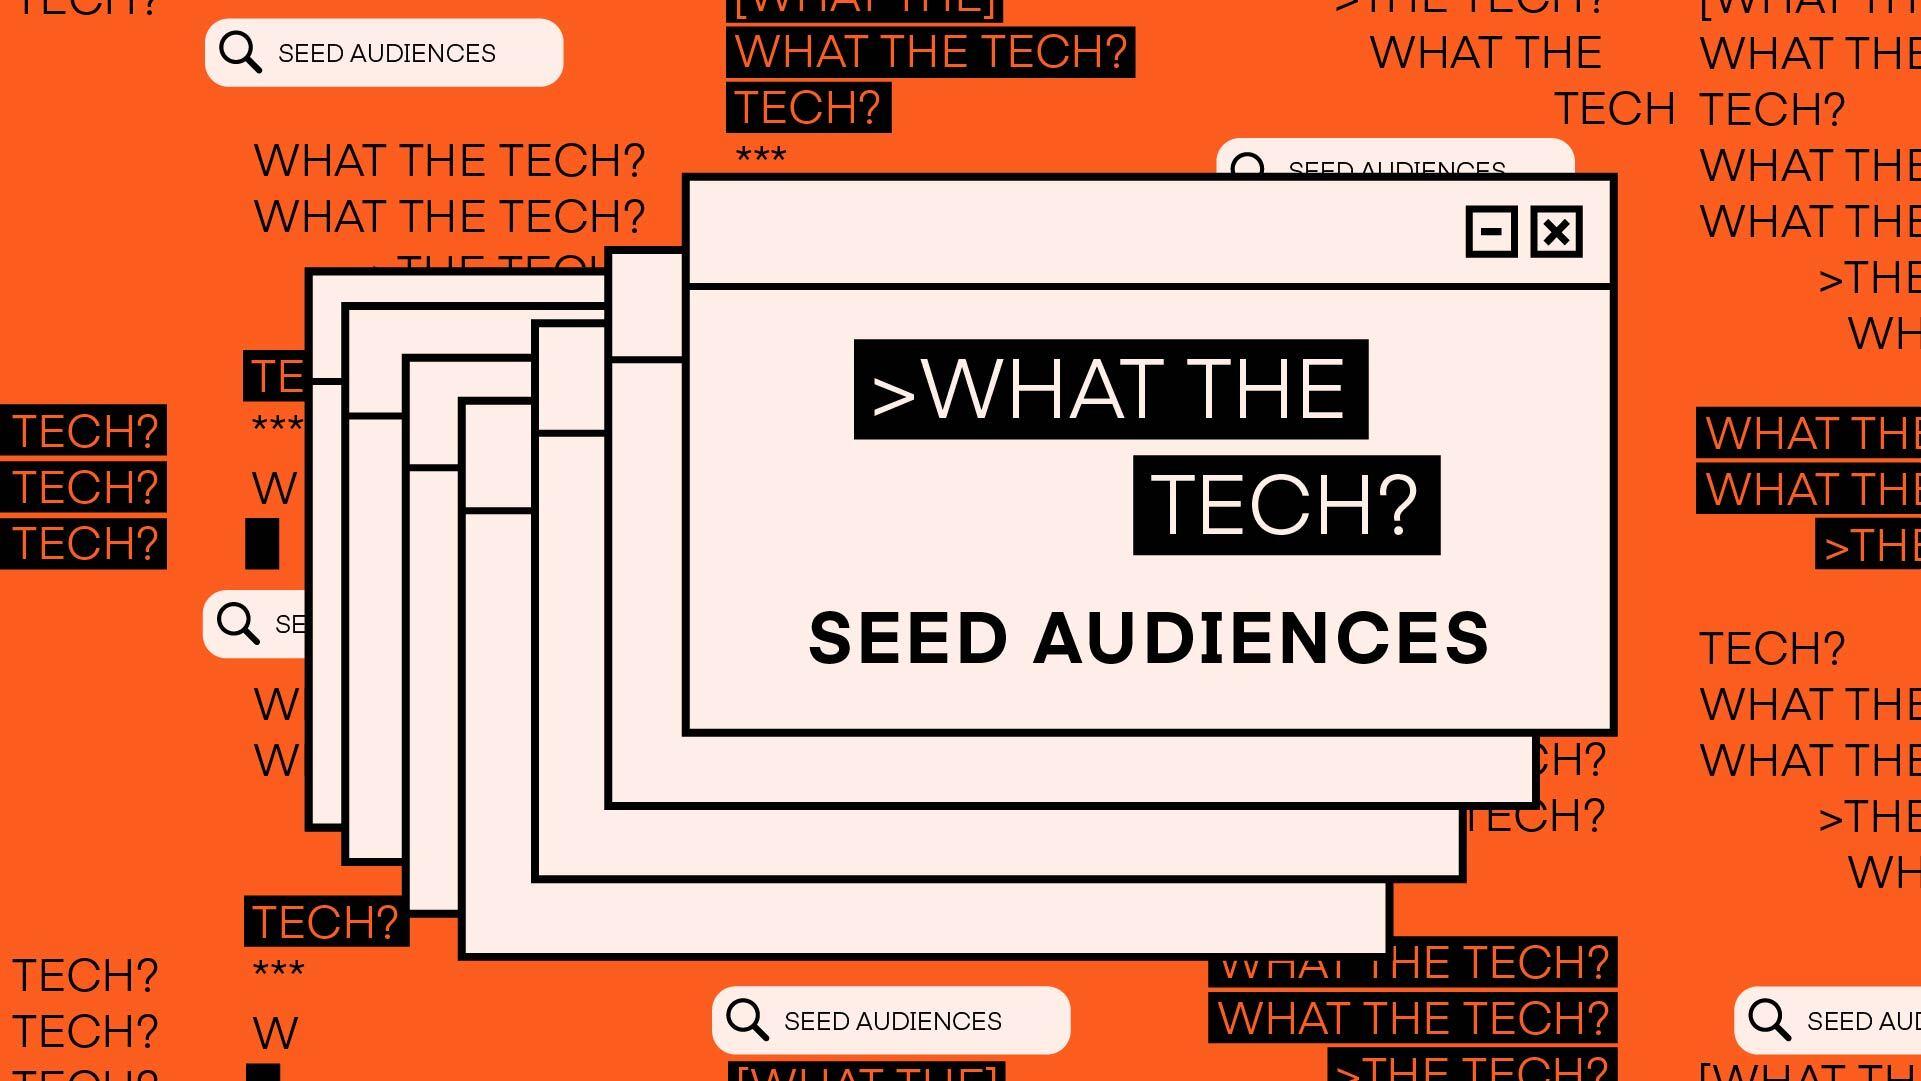 What the Tech are seed audiences?